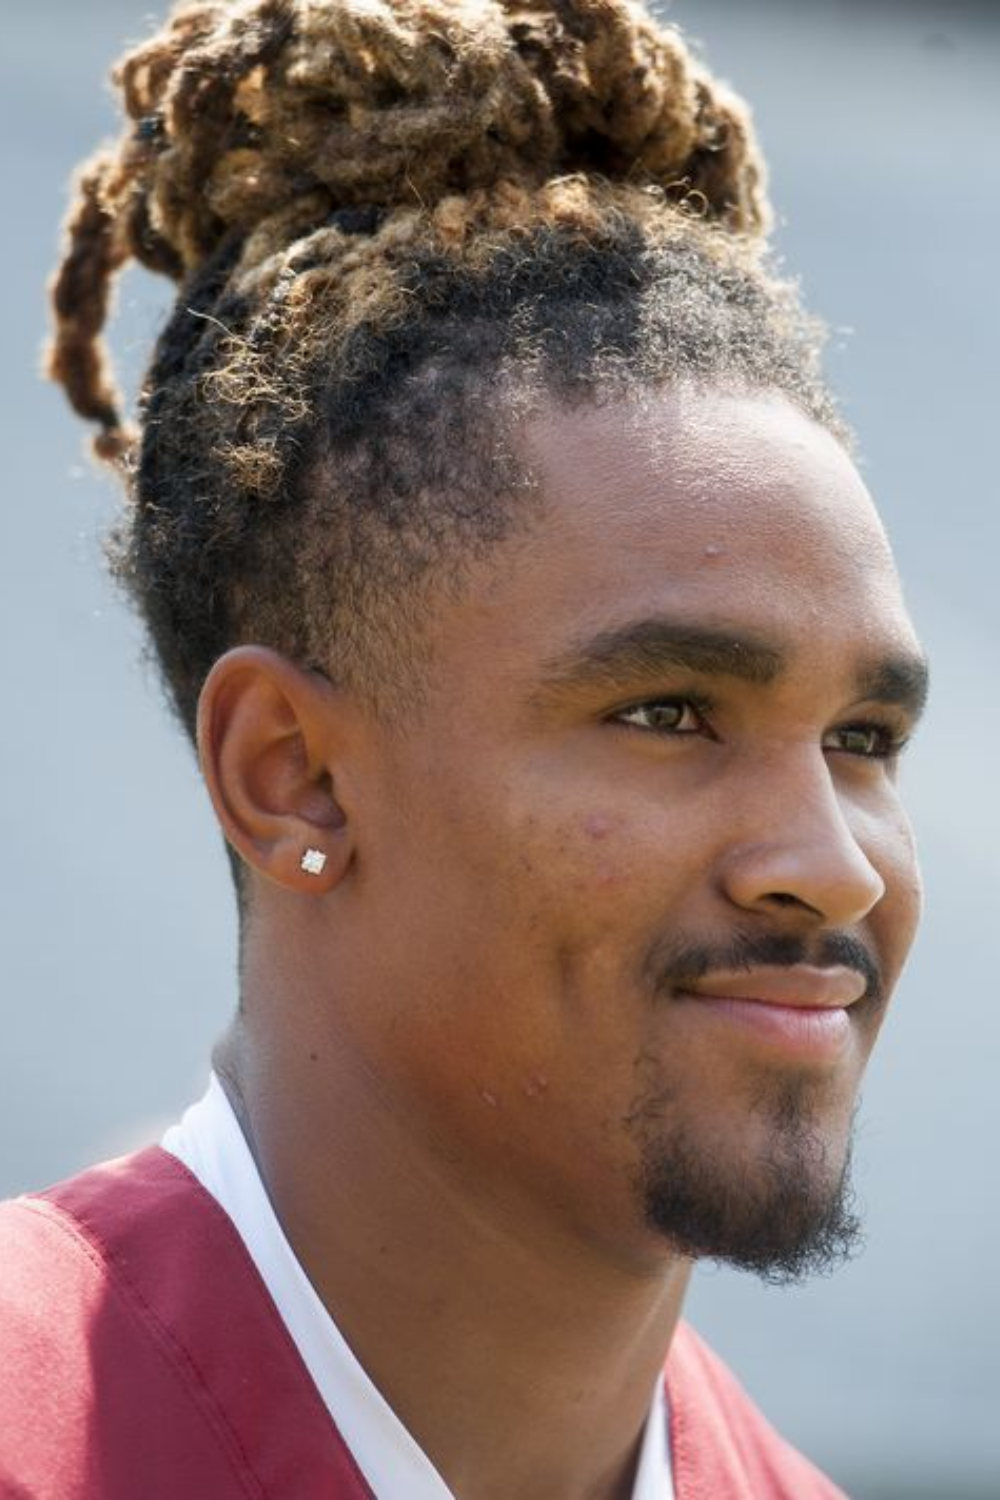 jalen hurts dreads tied up